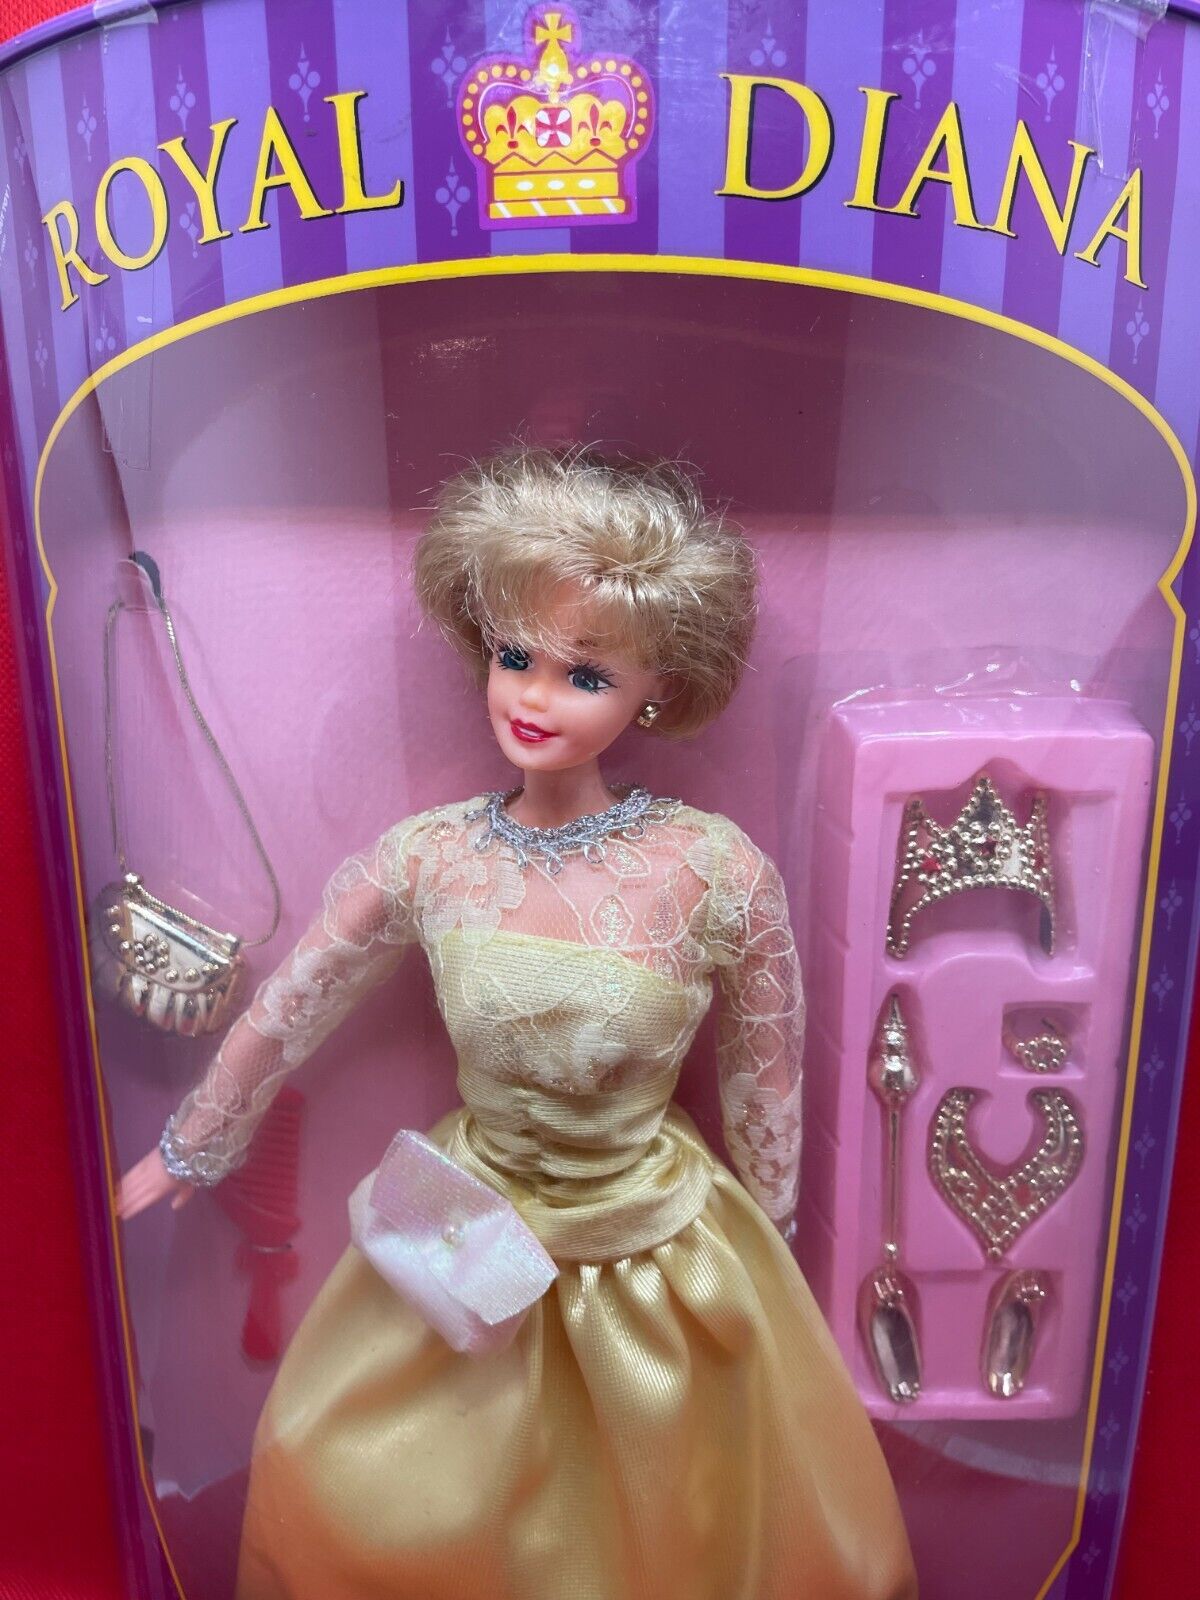 Way Out Toys Royal Diana, Princess Diana Doll with jewels, bling. Uncommon, MIB